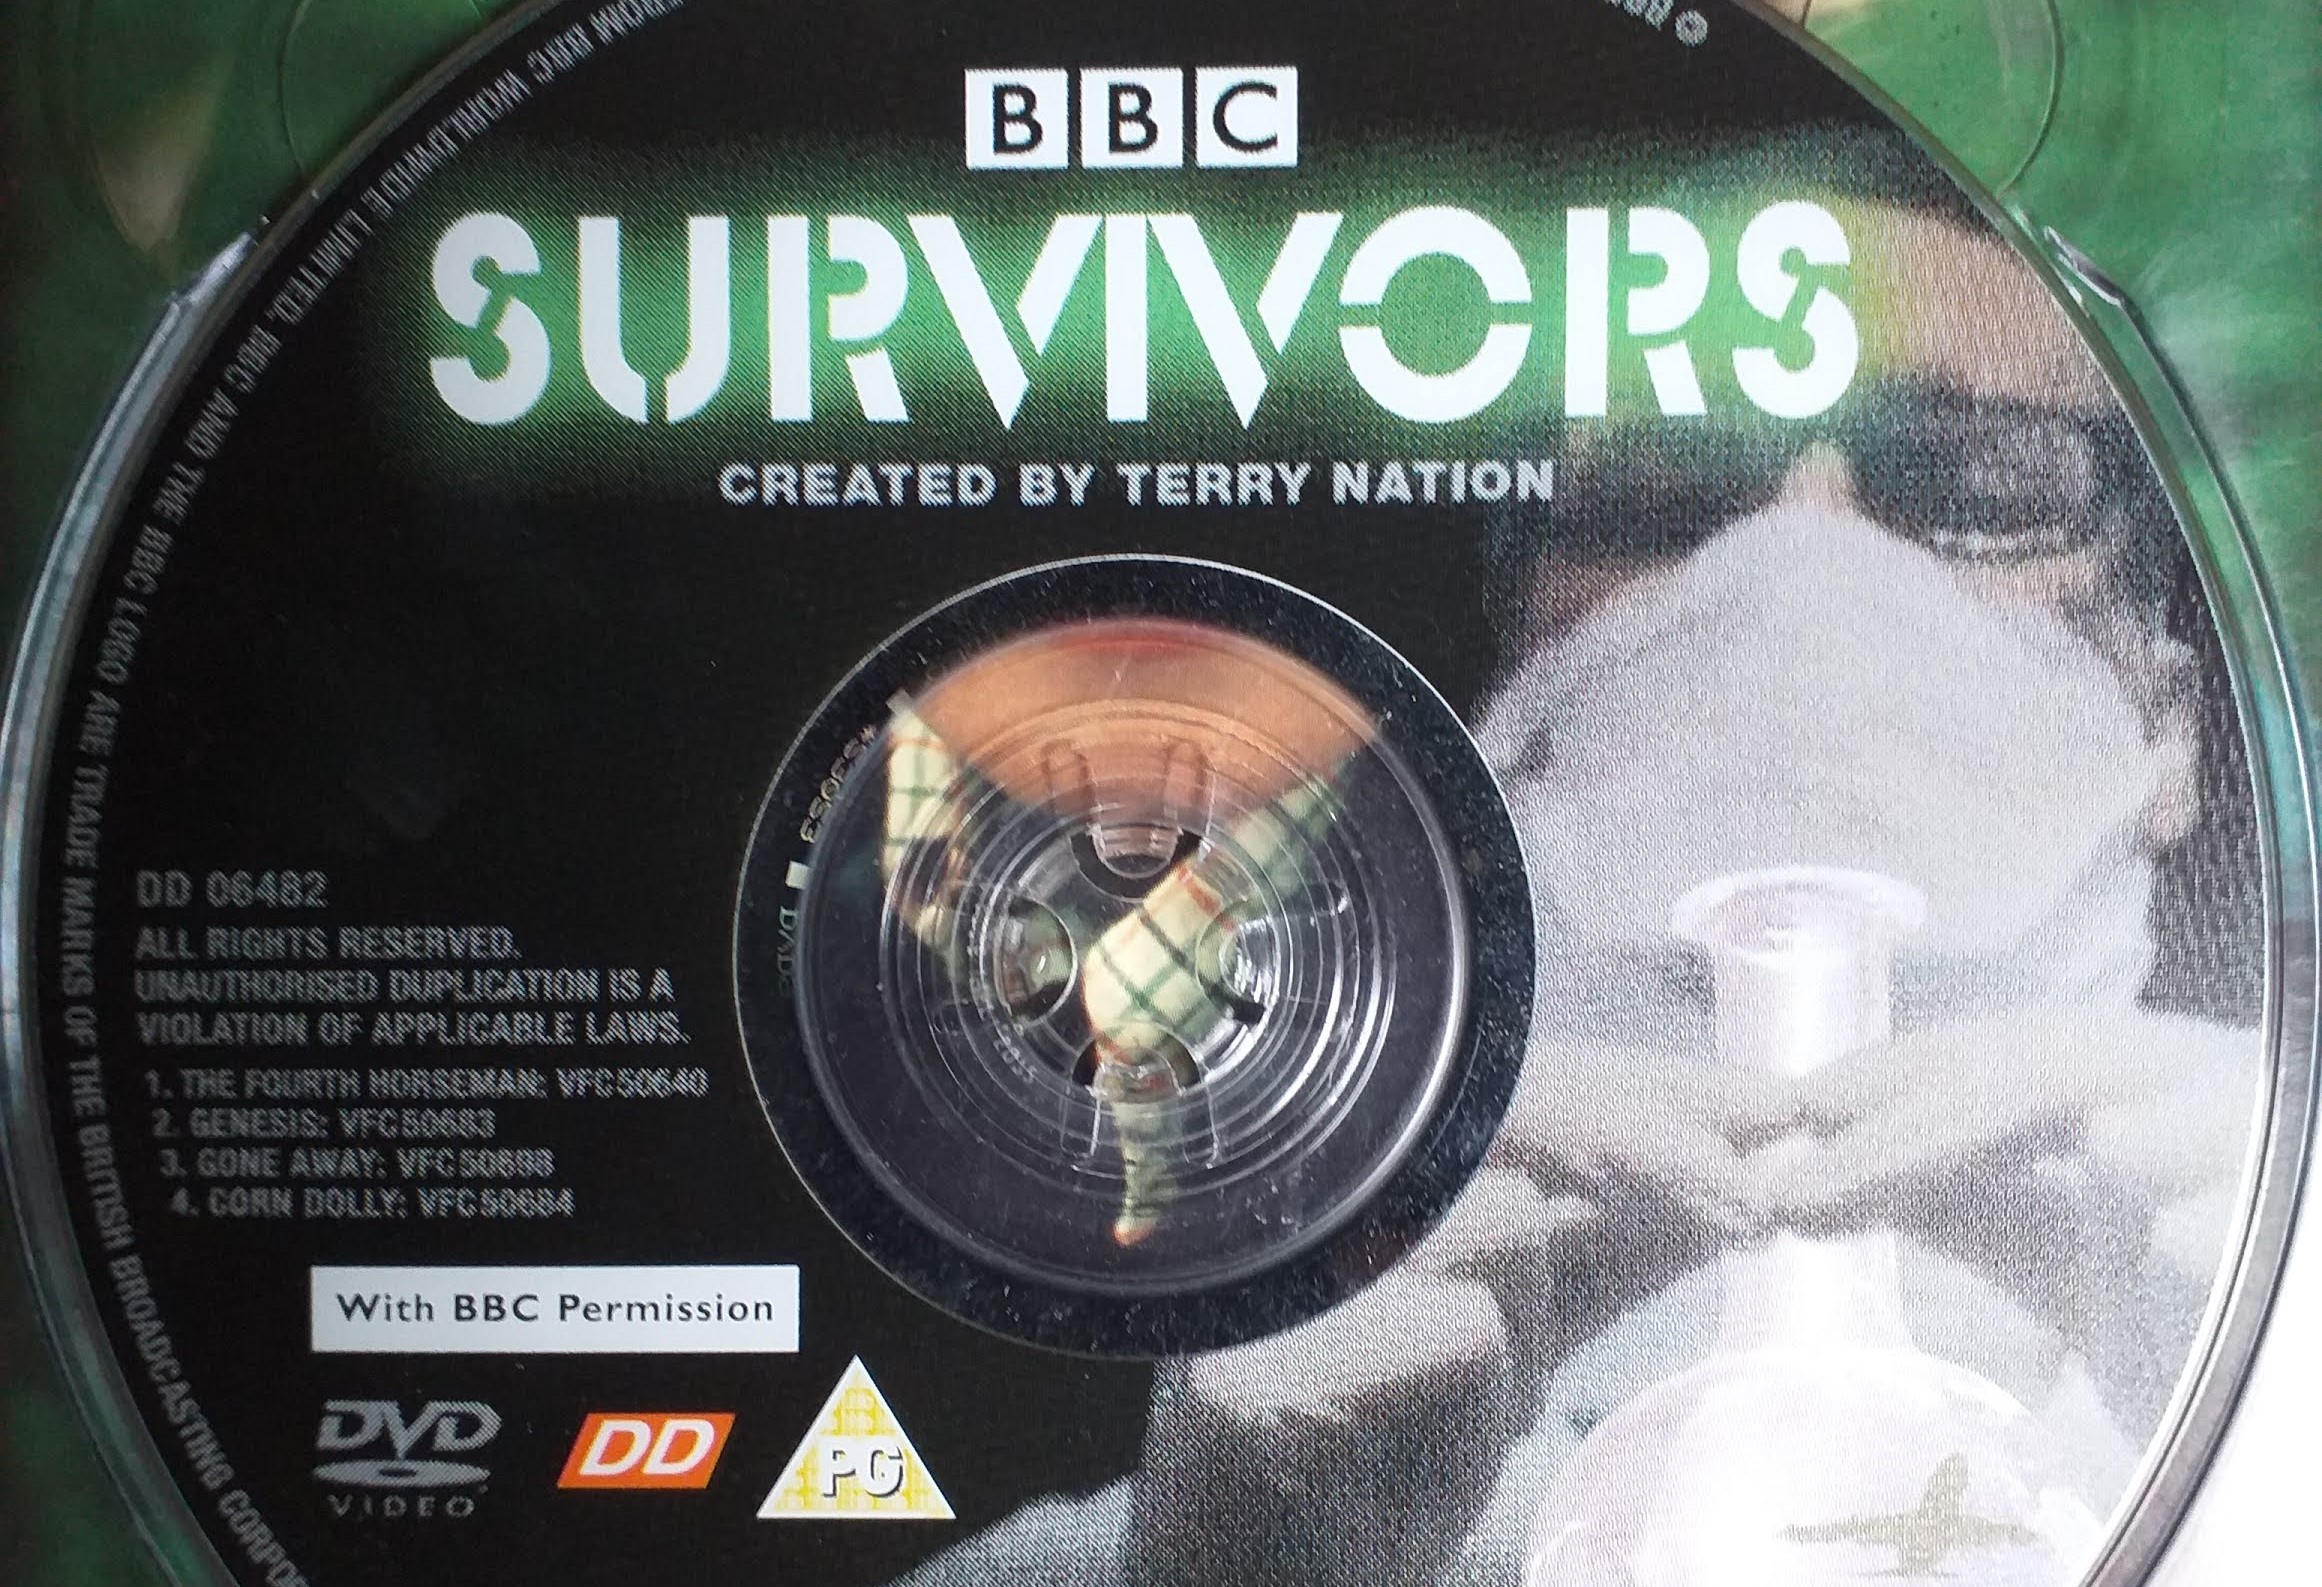 Disc one in the DD DVE release of Survivors series one